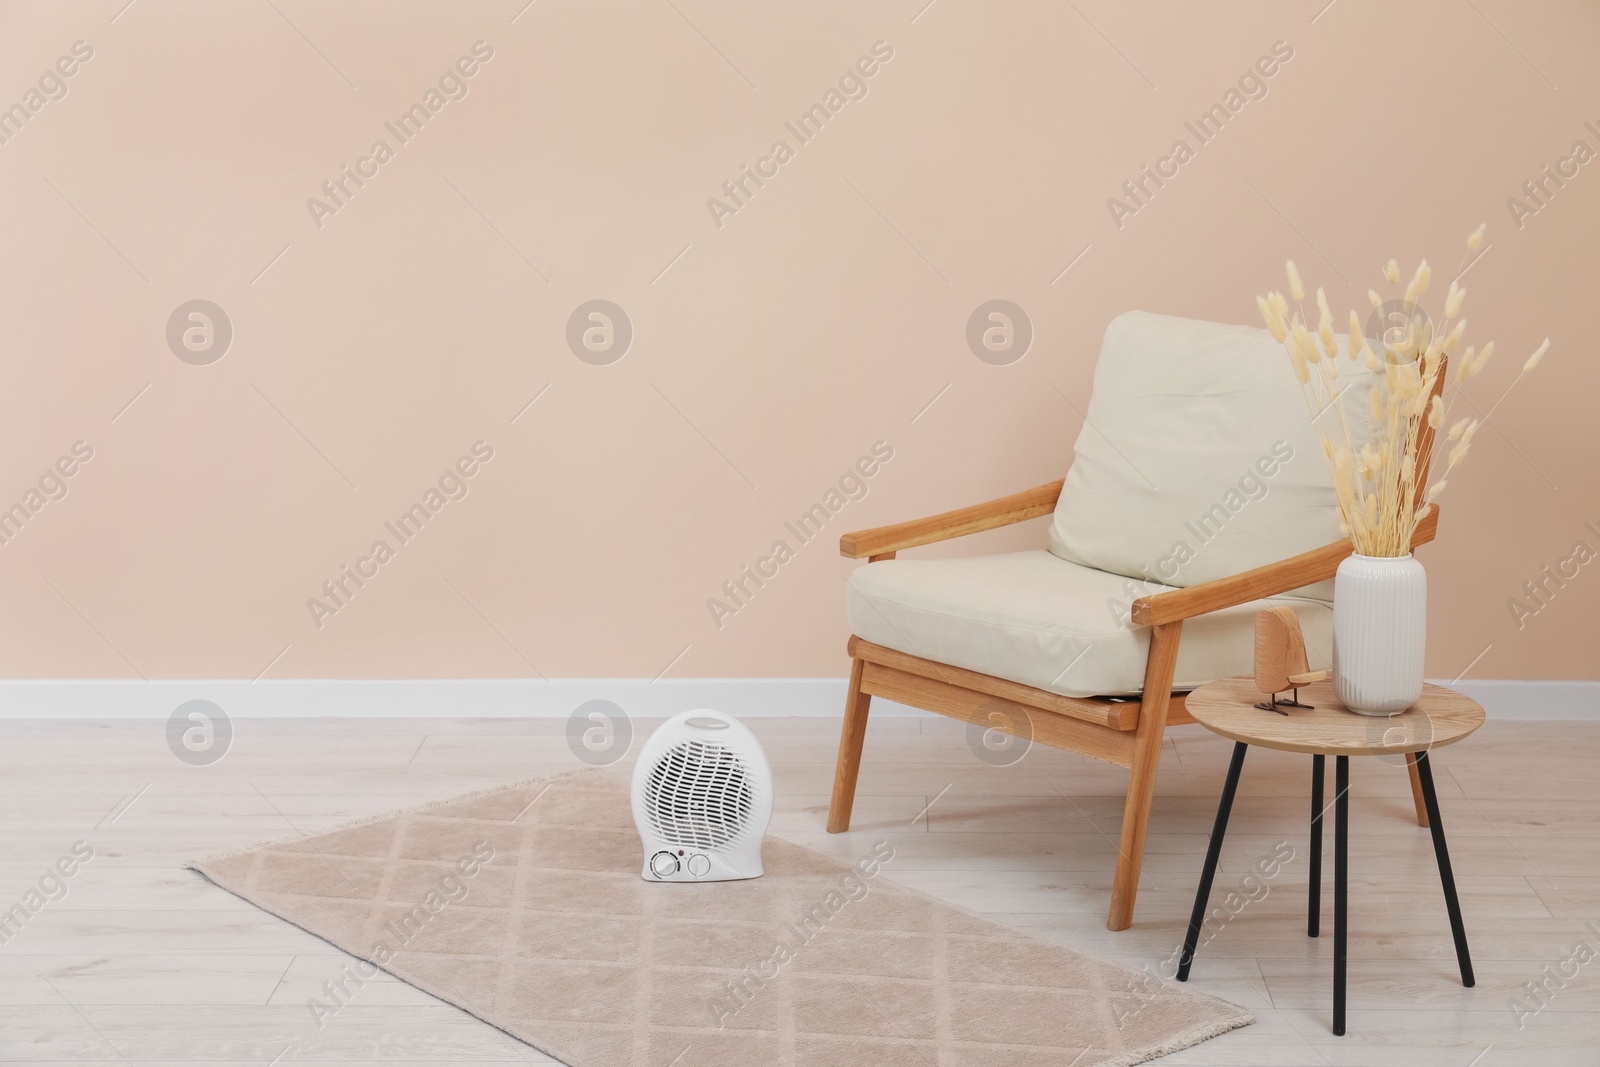 Photo of Compact electric fan heater near armchair indoors, space for text